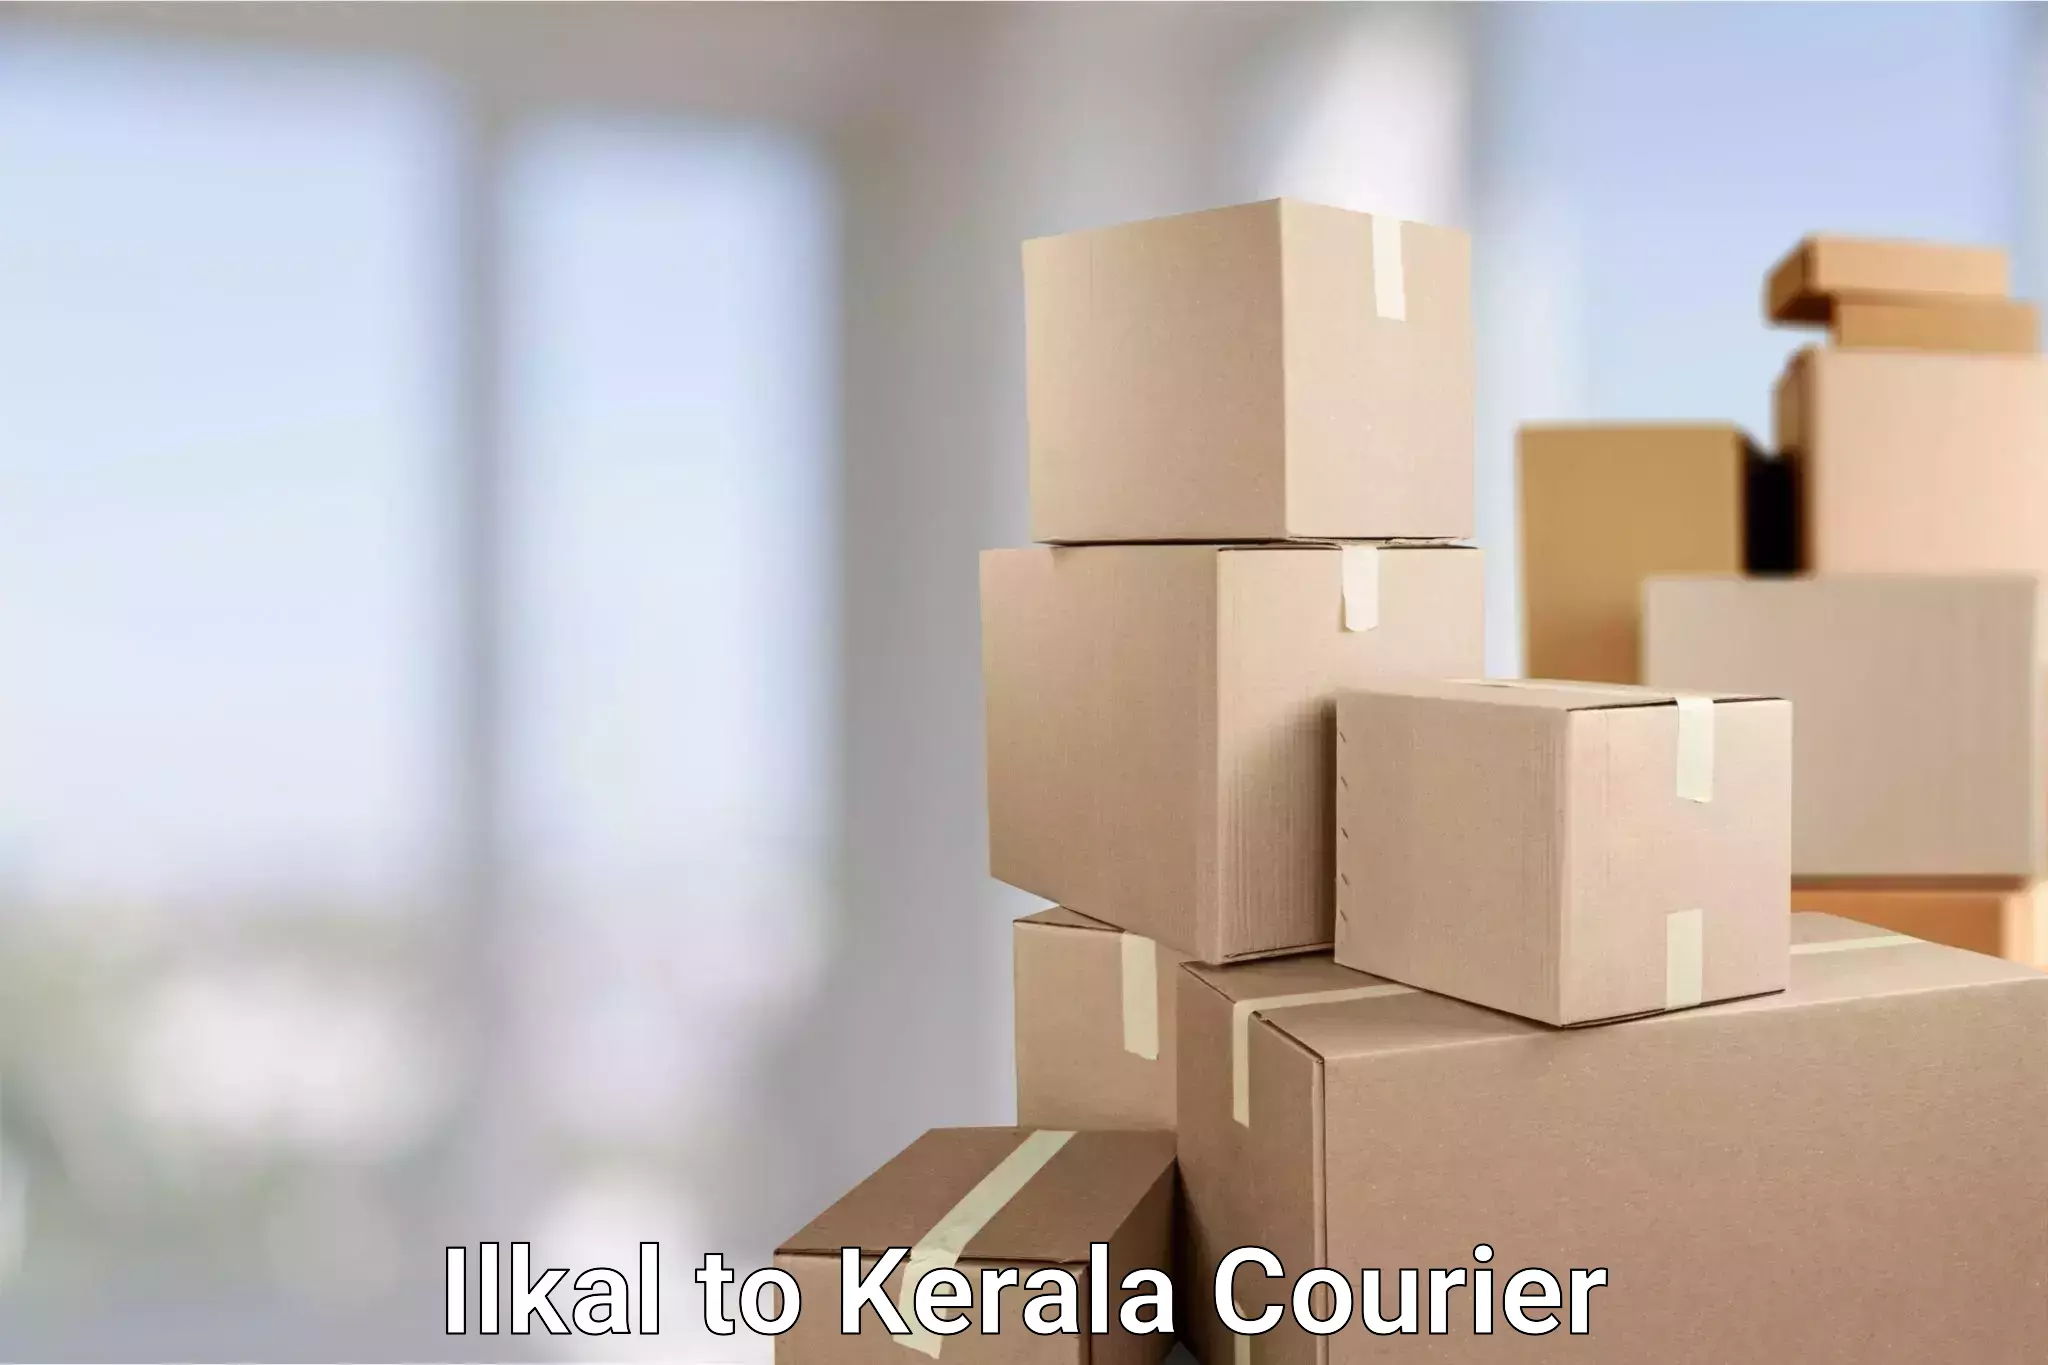 End-to-end delivery in Ilkal to Kerala